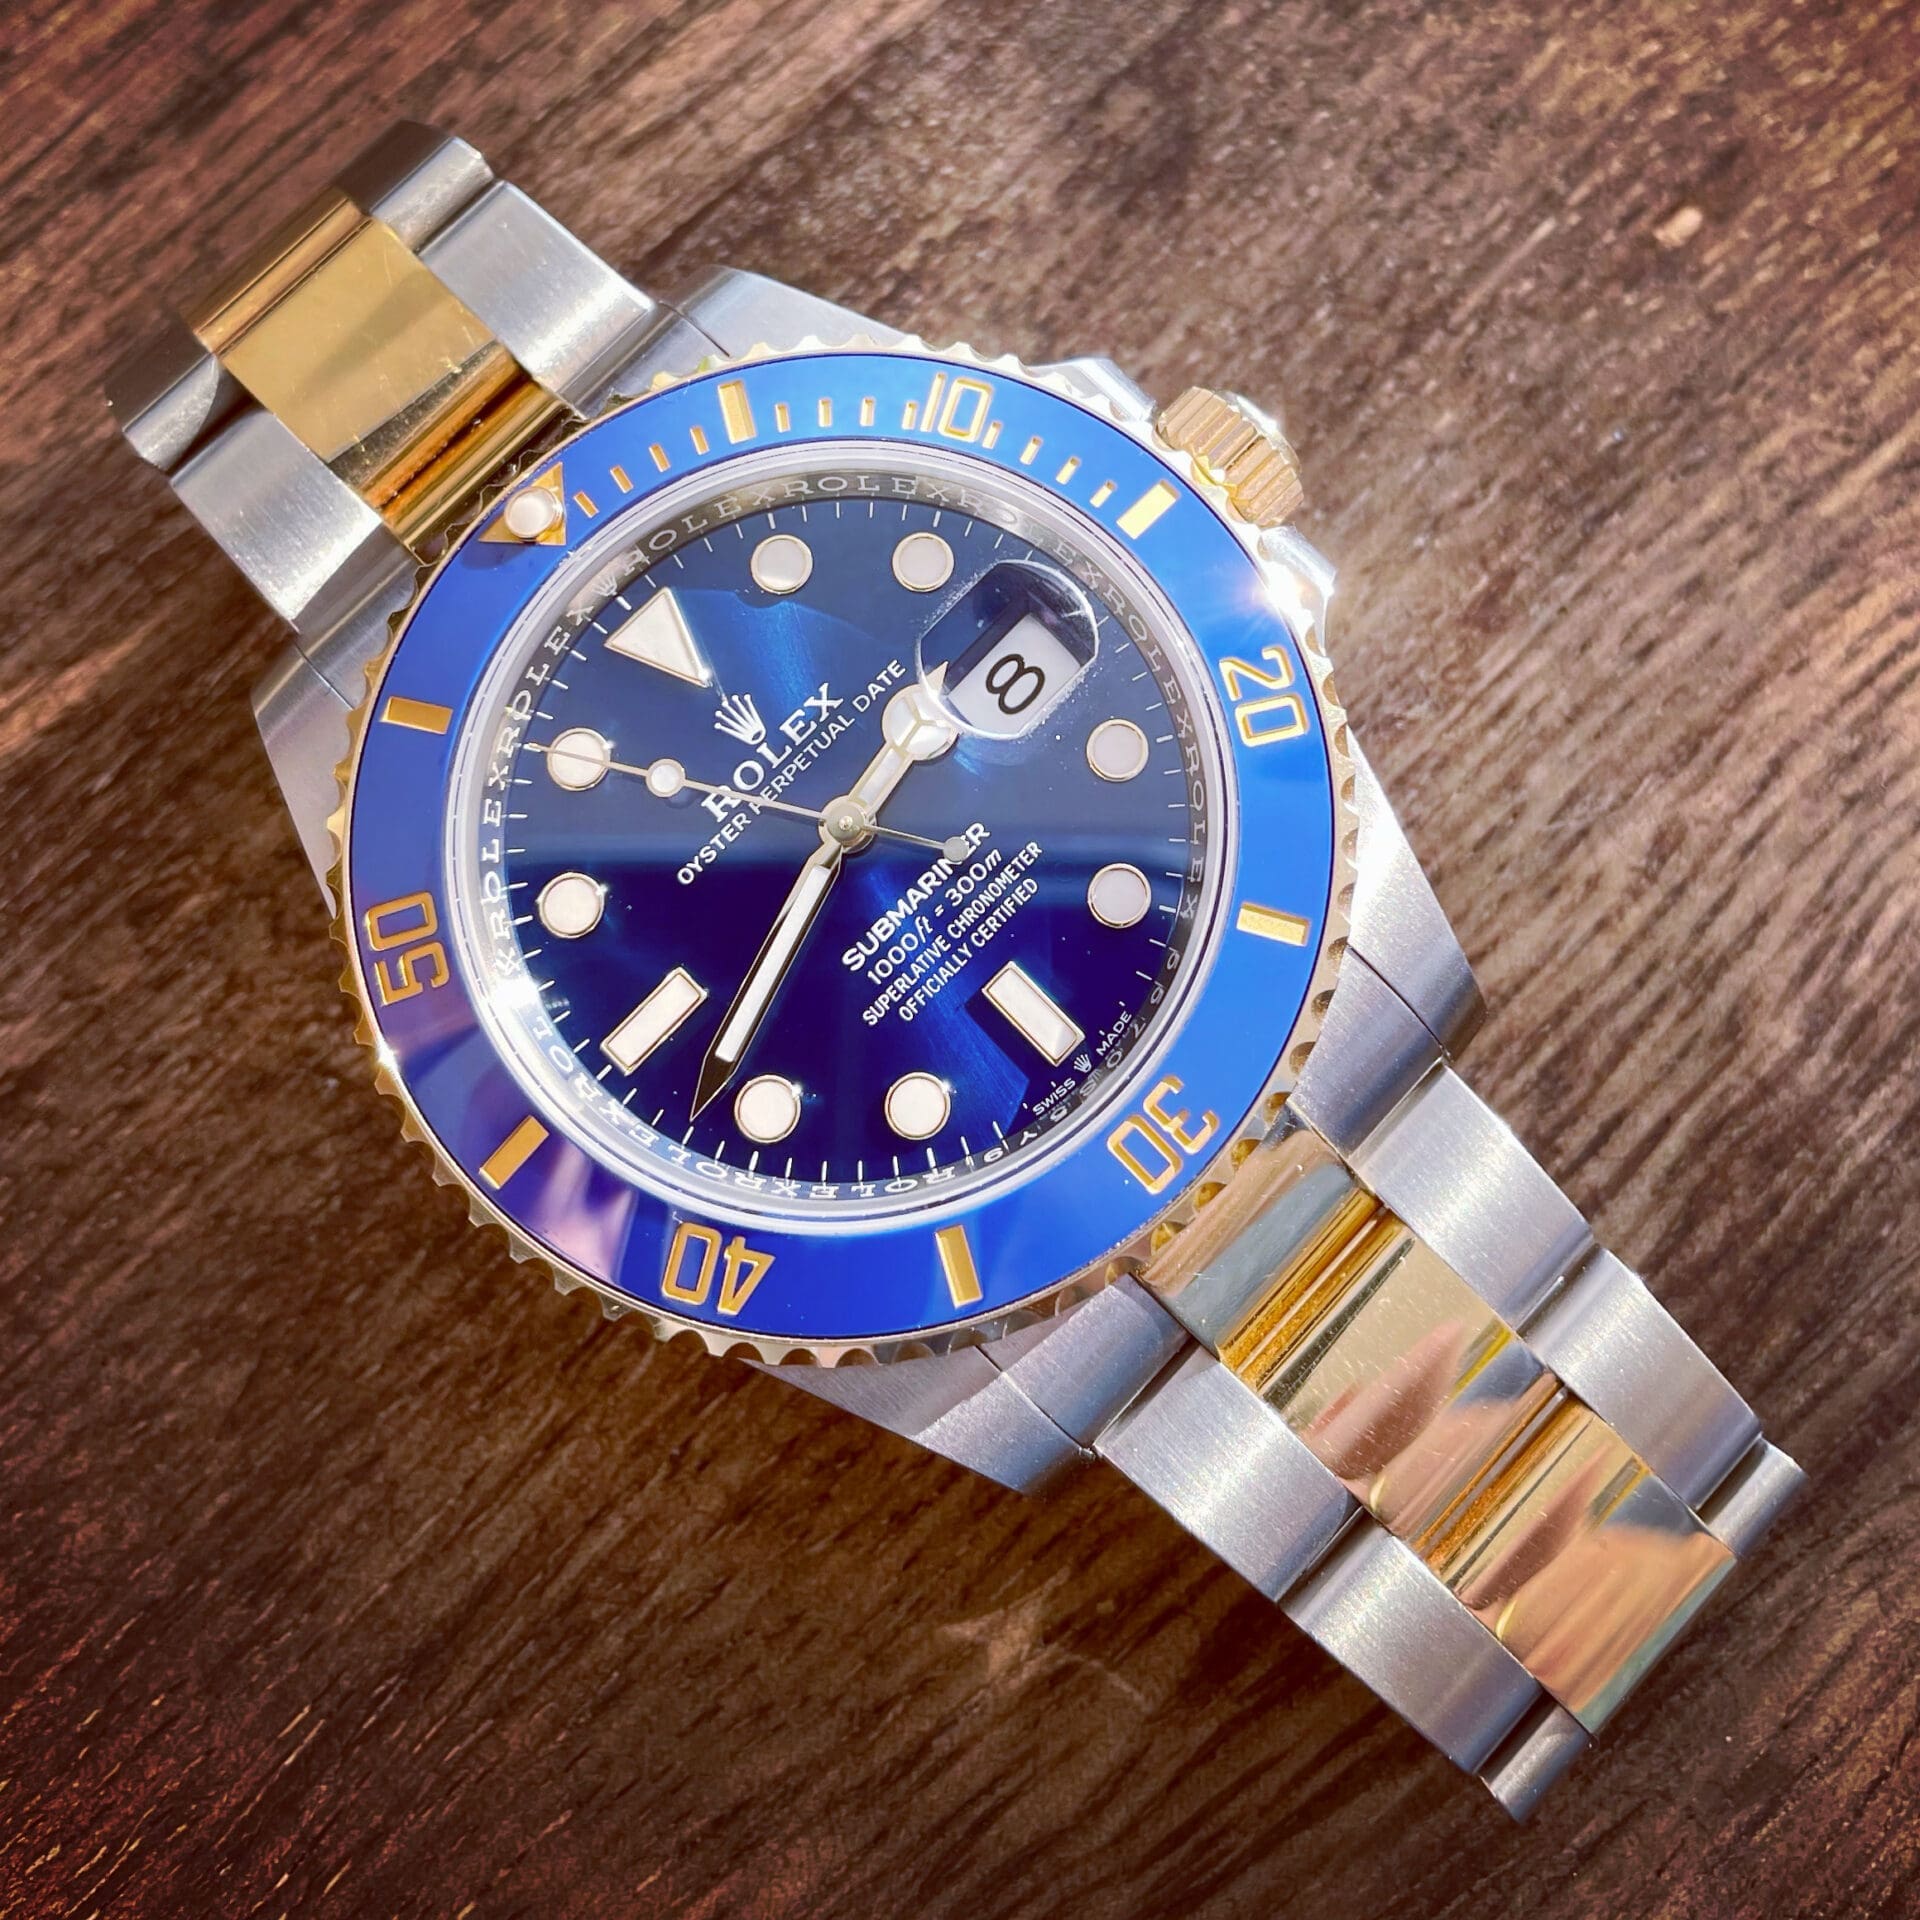 Rolex Submariner Yellow Gold Band Wristwatches for sale